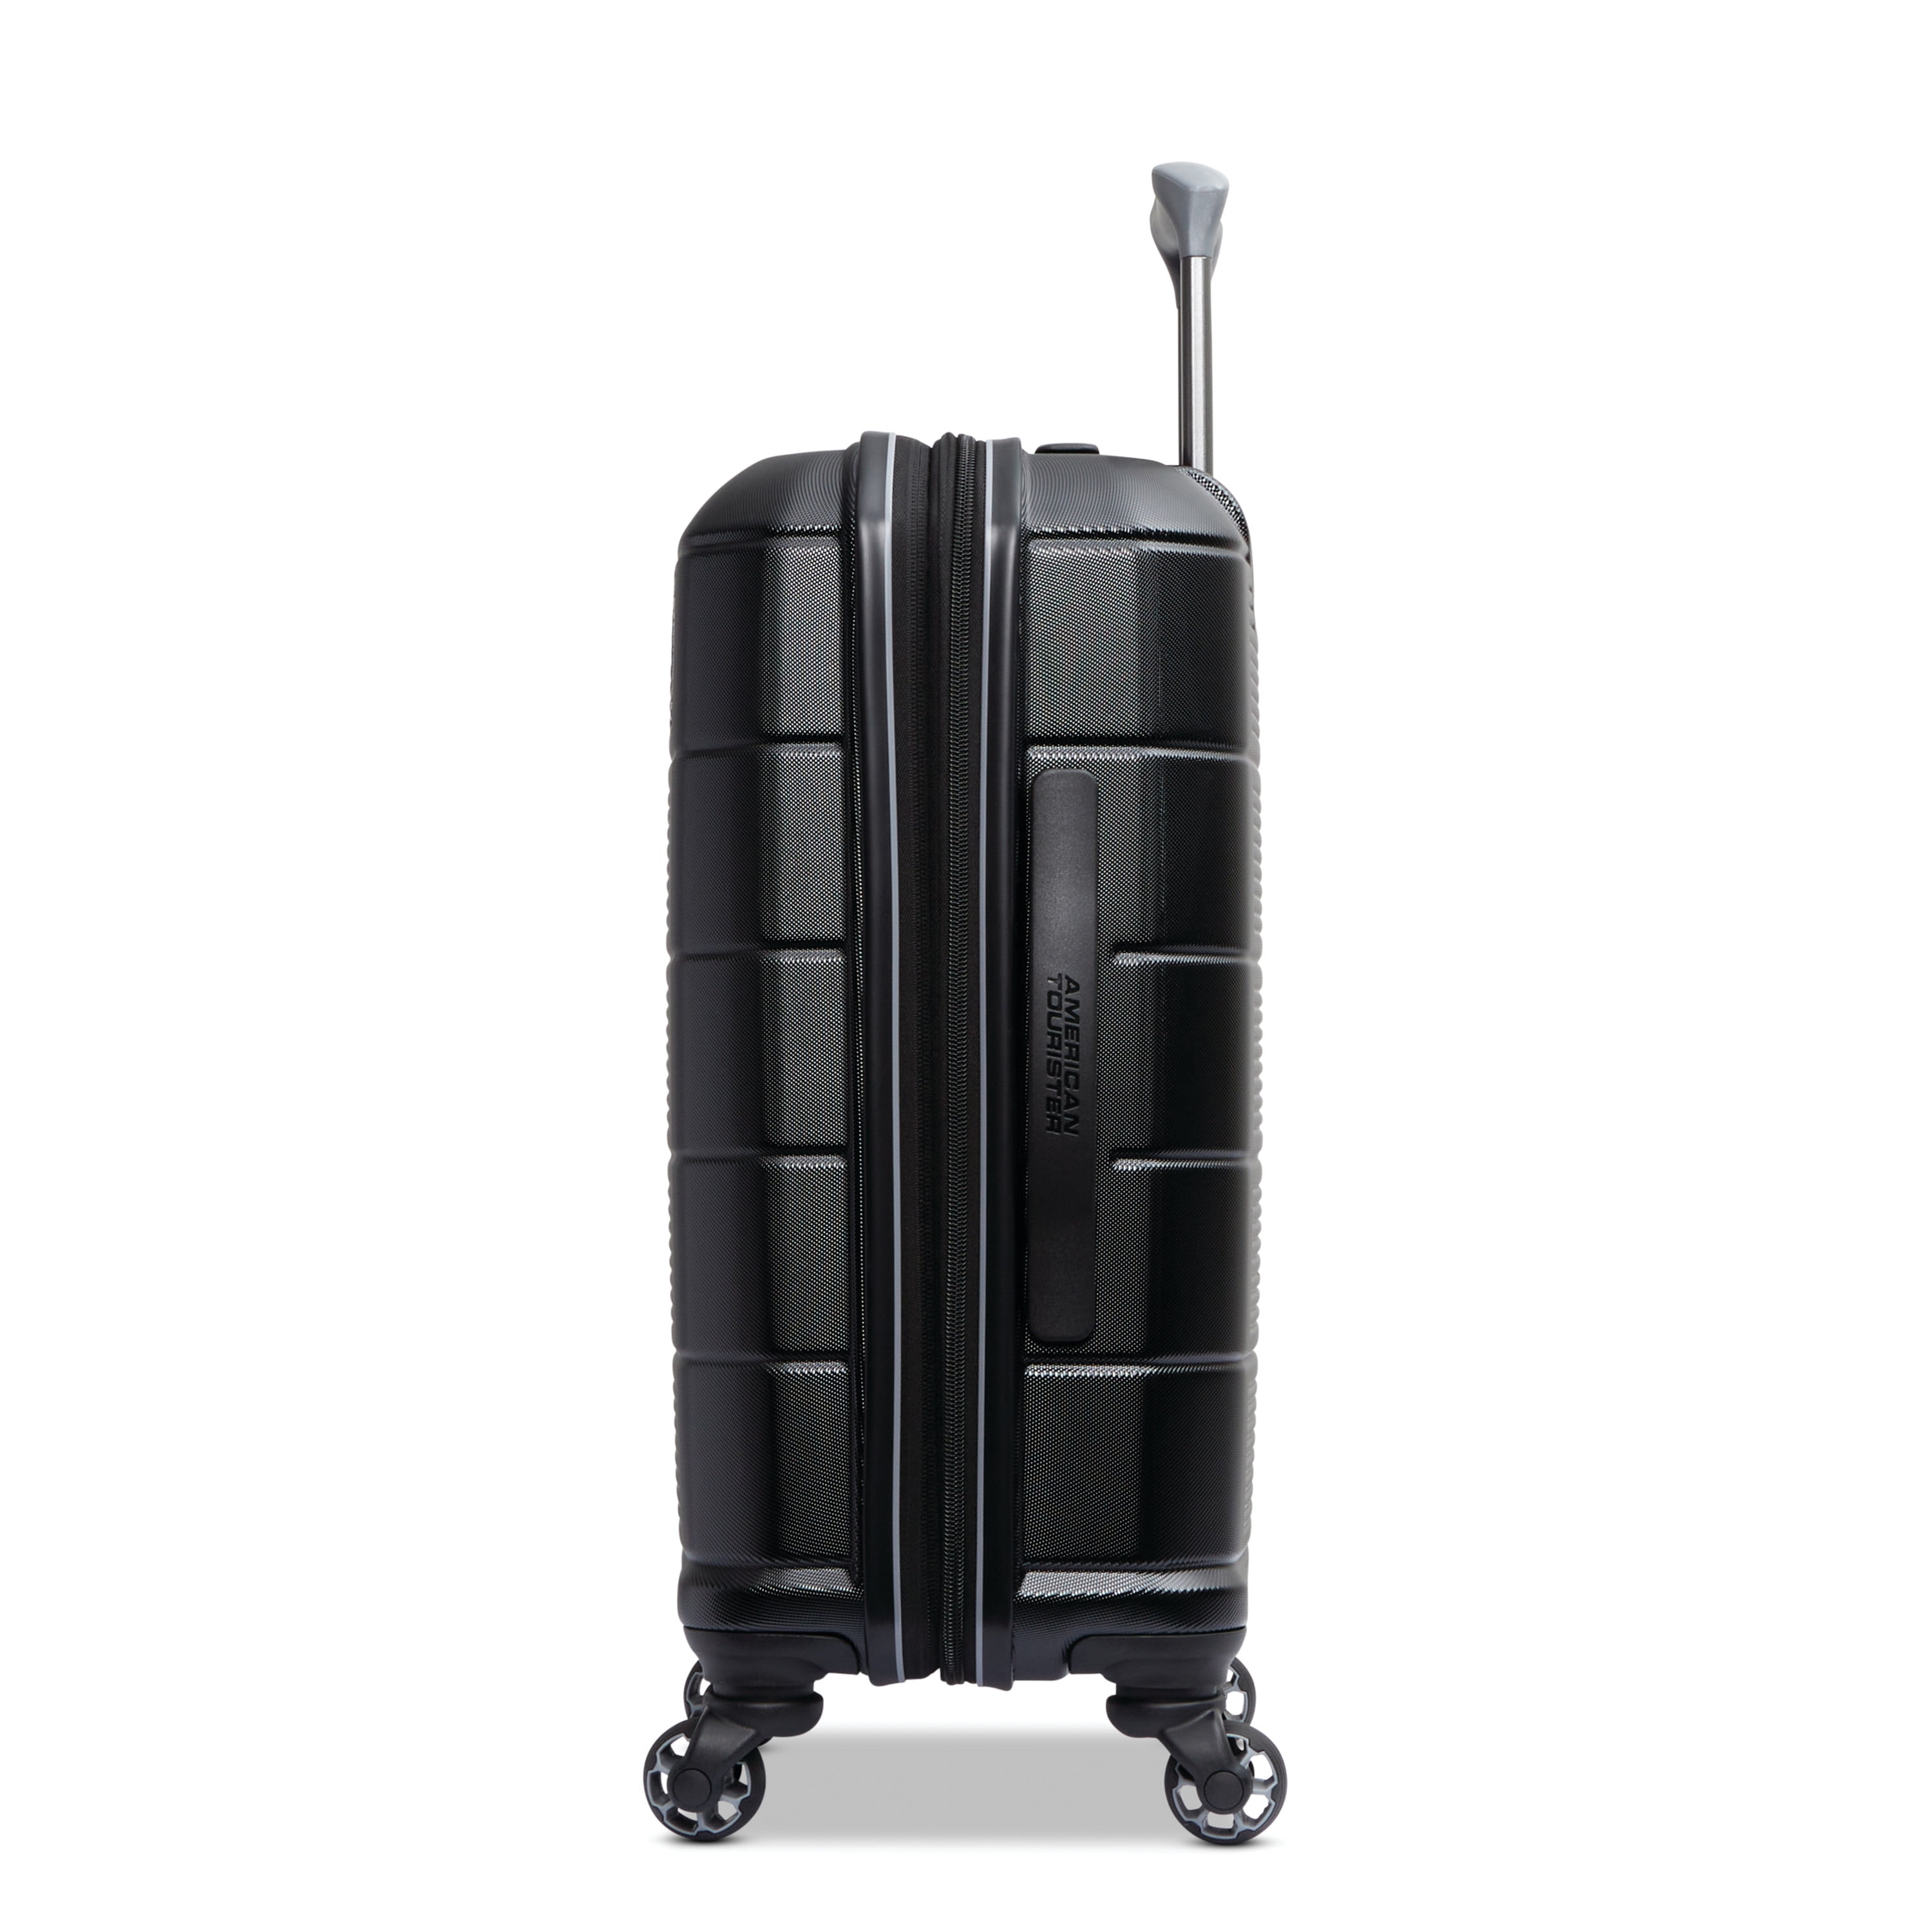 Buy Stratum 2.0 Carry-On for USD 89.99